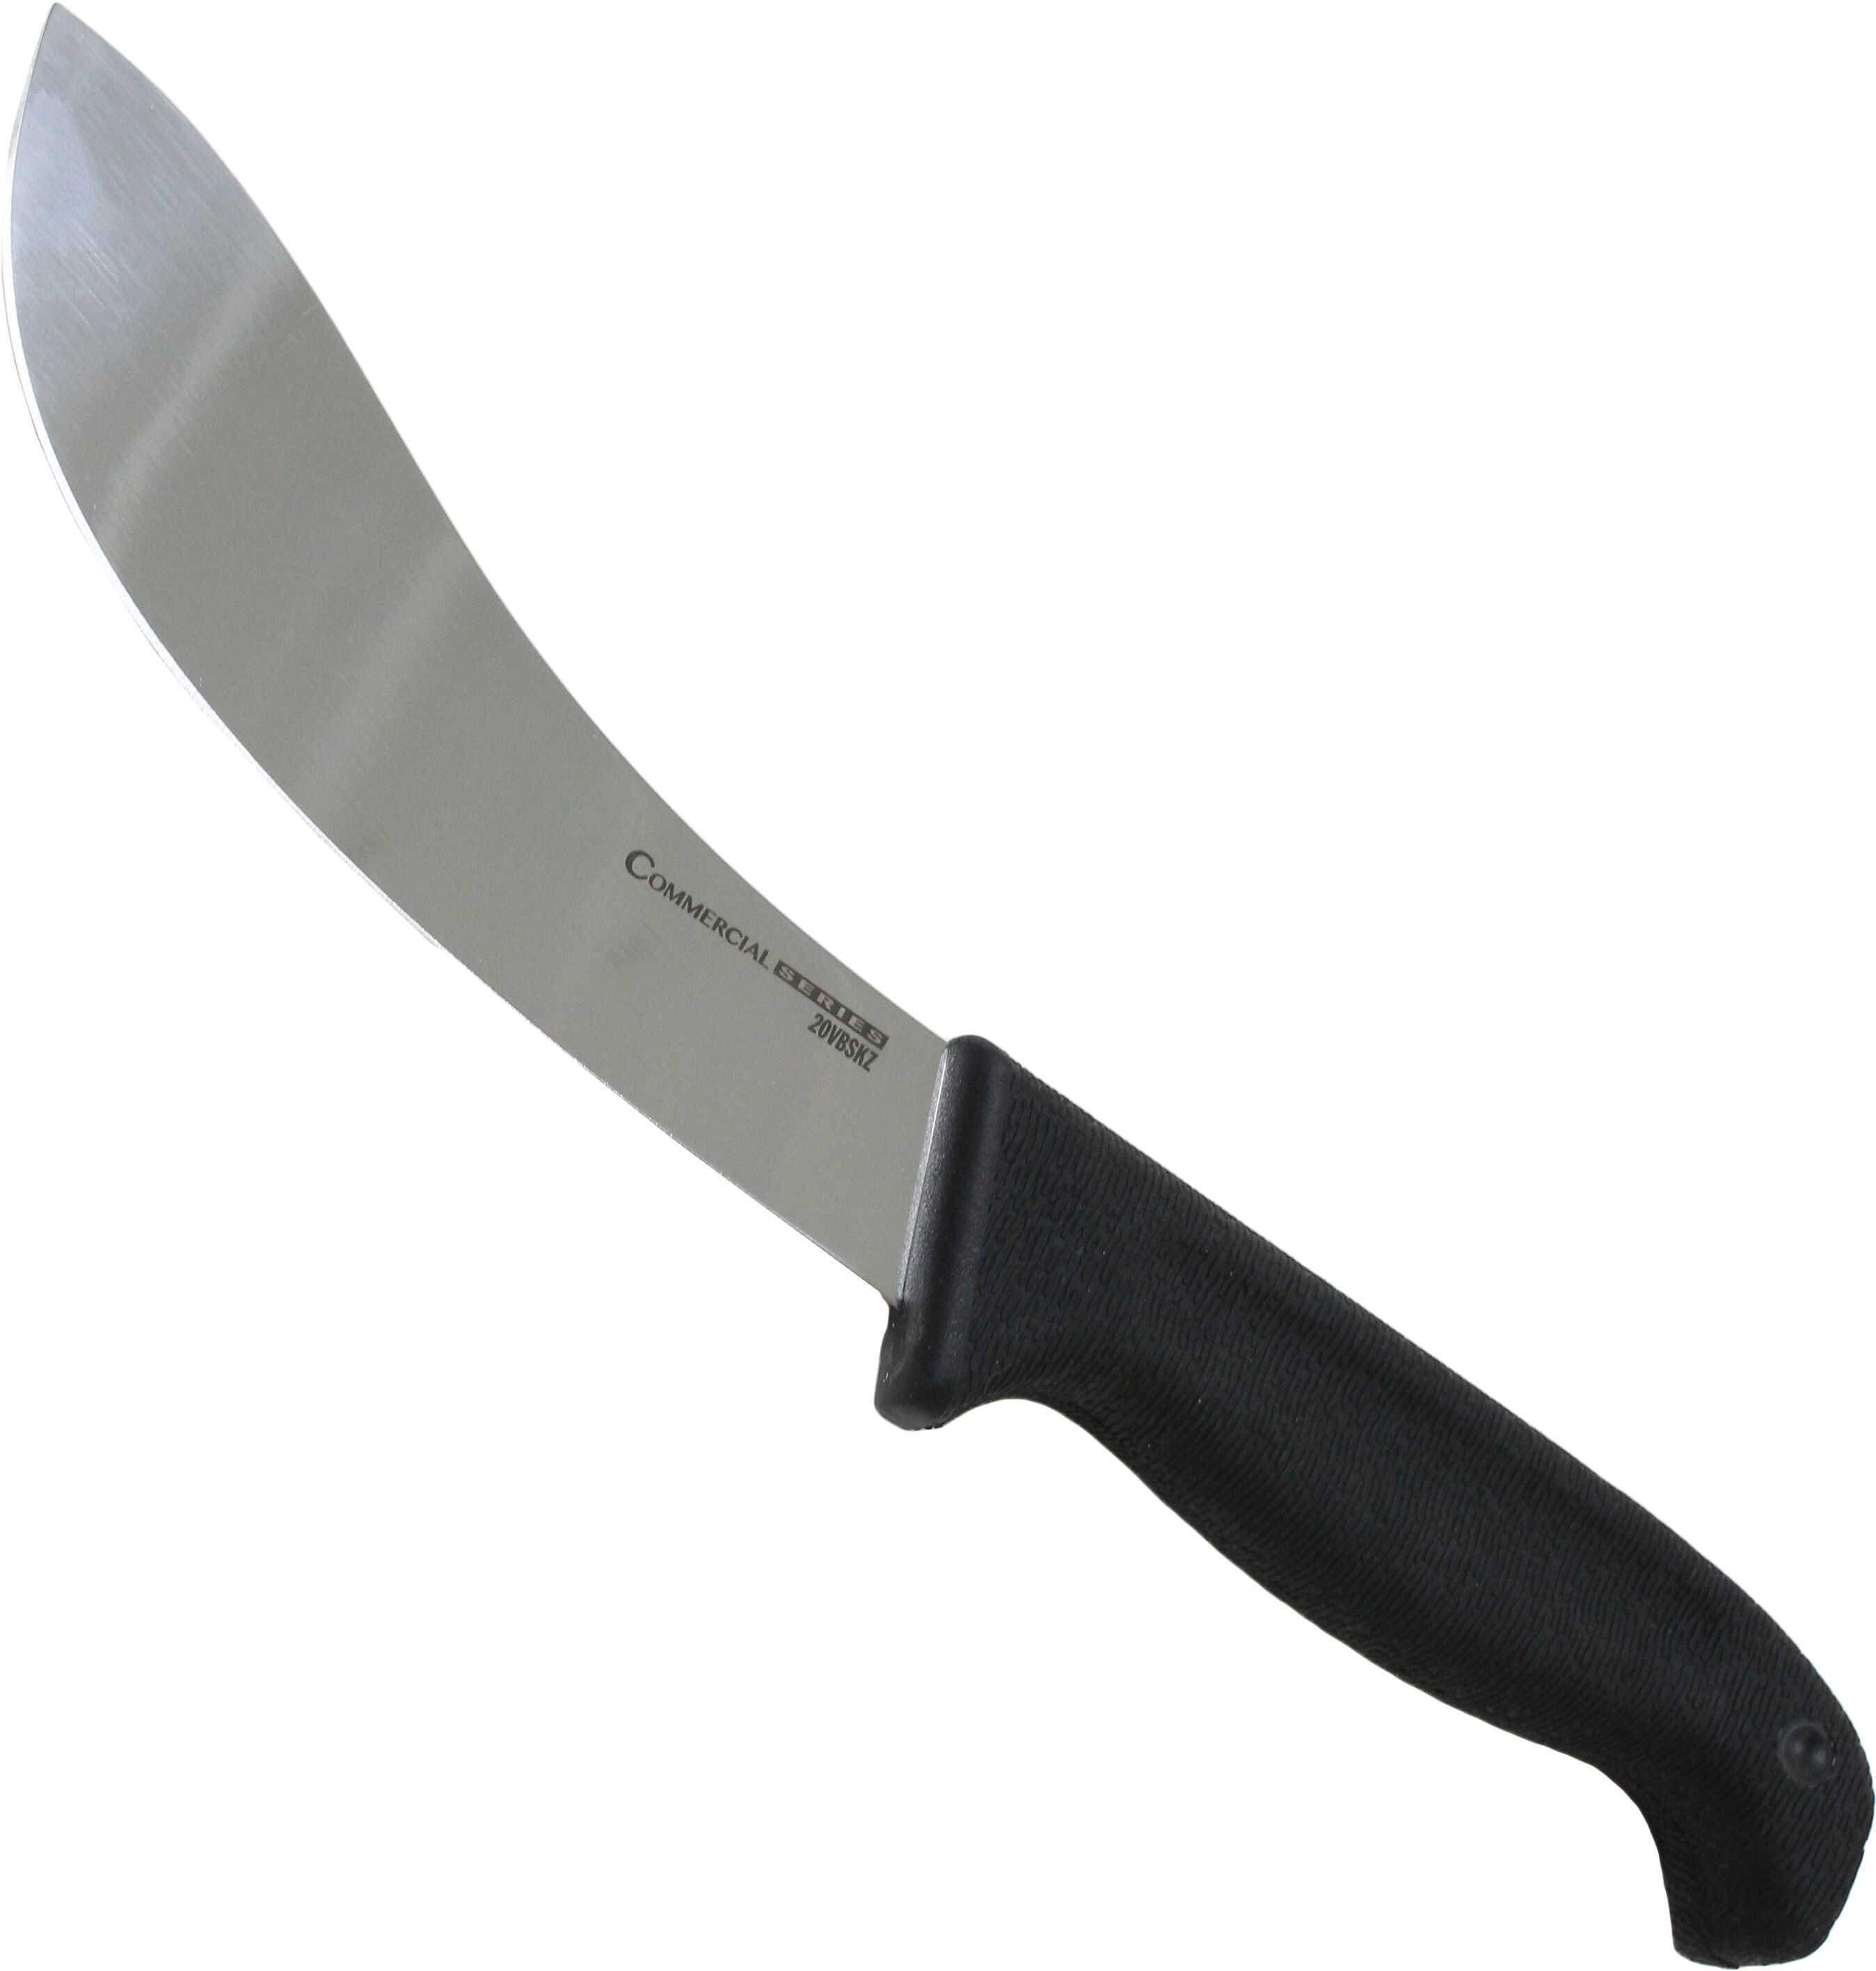 Cold Steel Commercial Series Big Country Skinner Md: 20VBSKZ